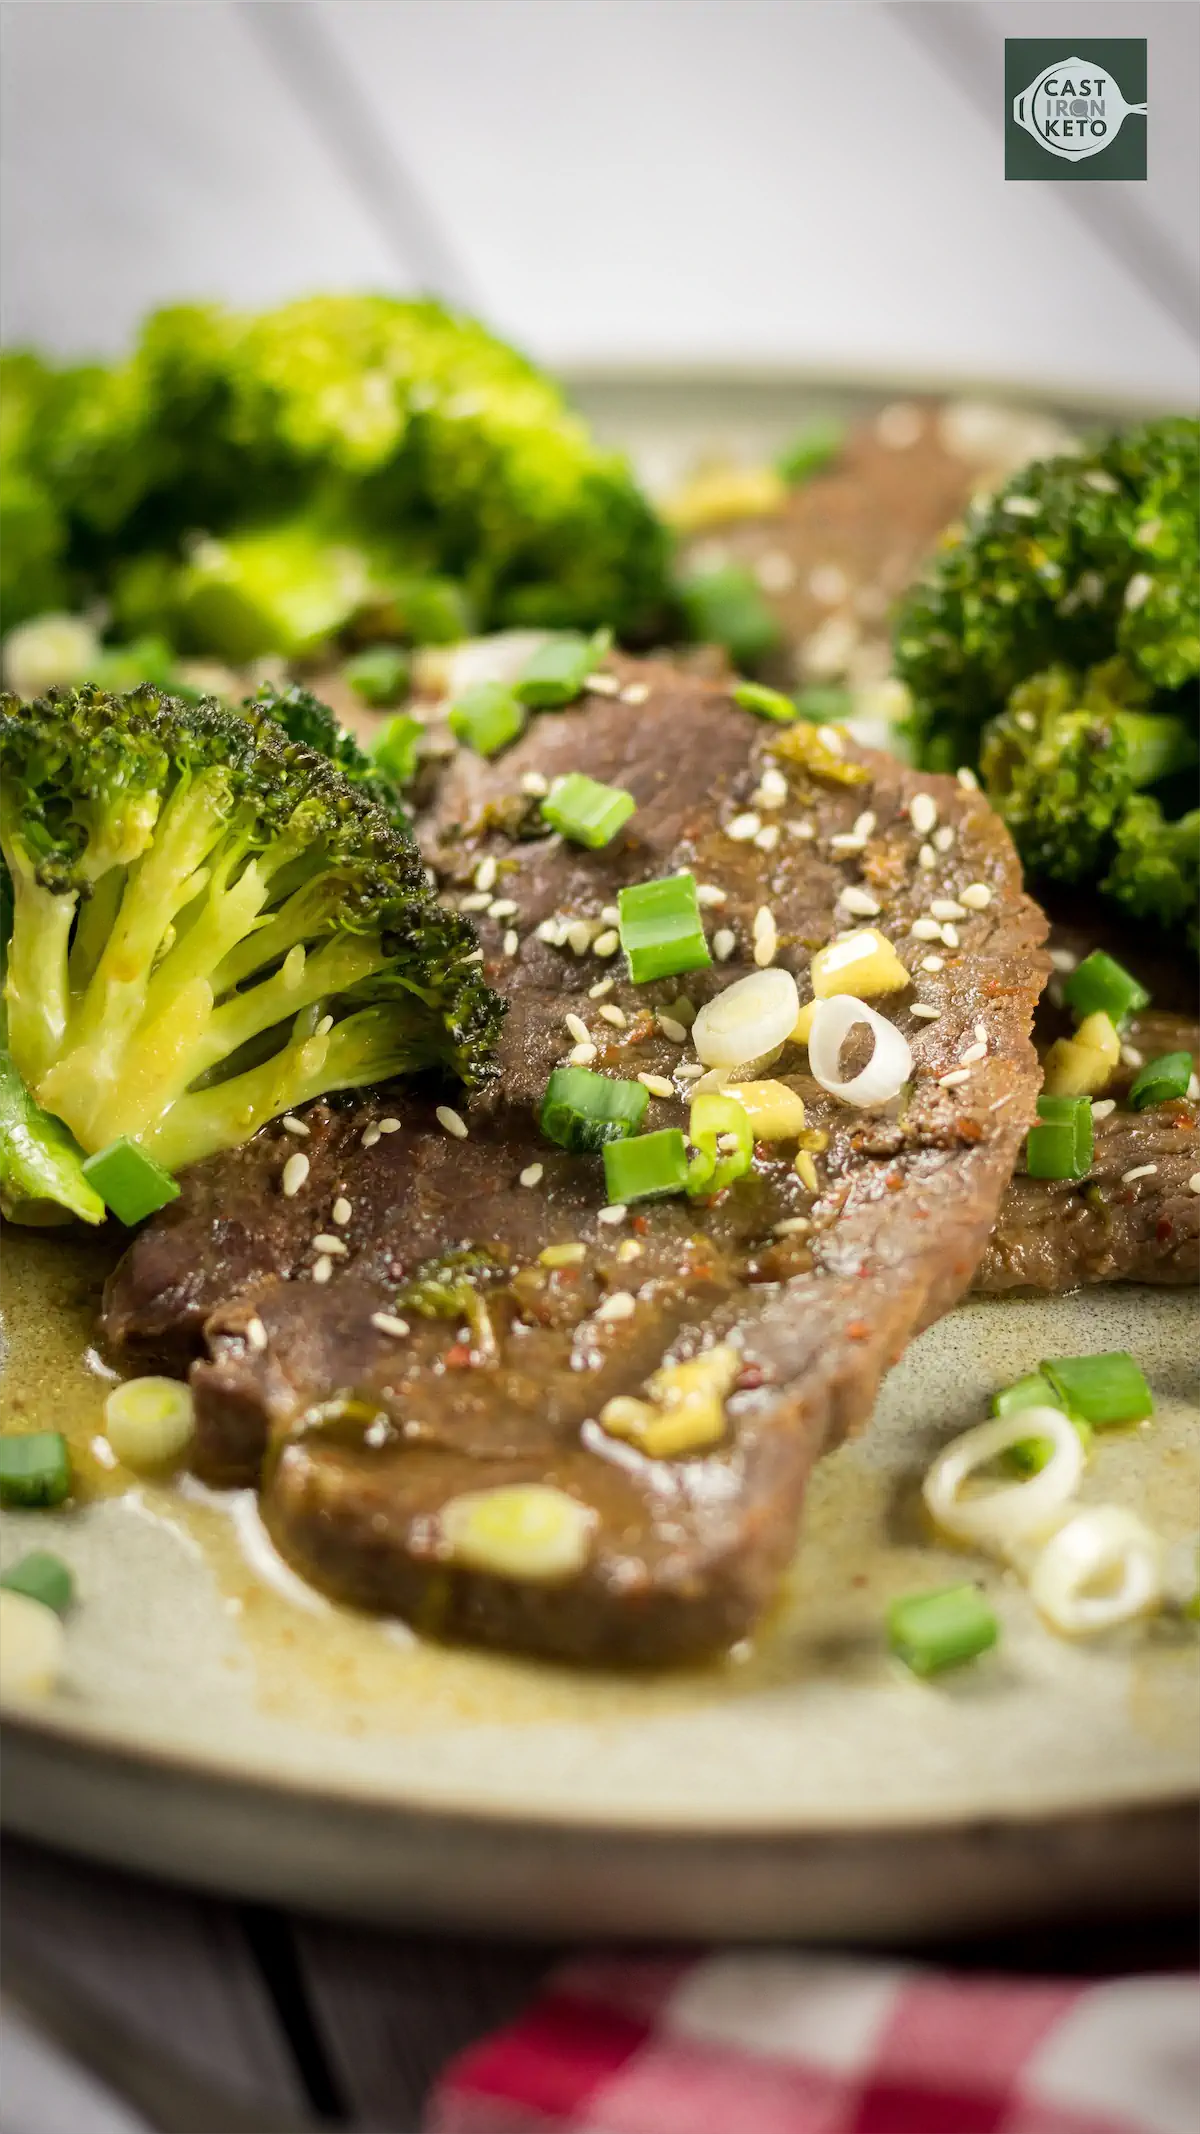 Low-carb beef and broccoli meal.